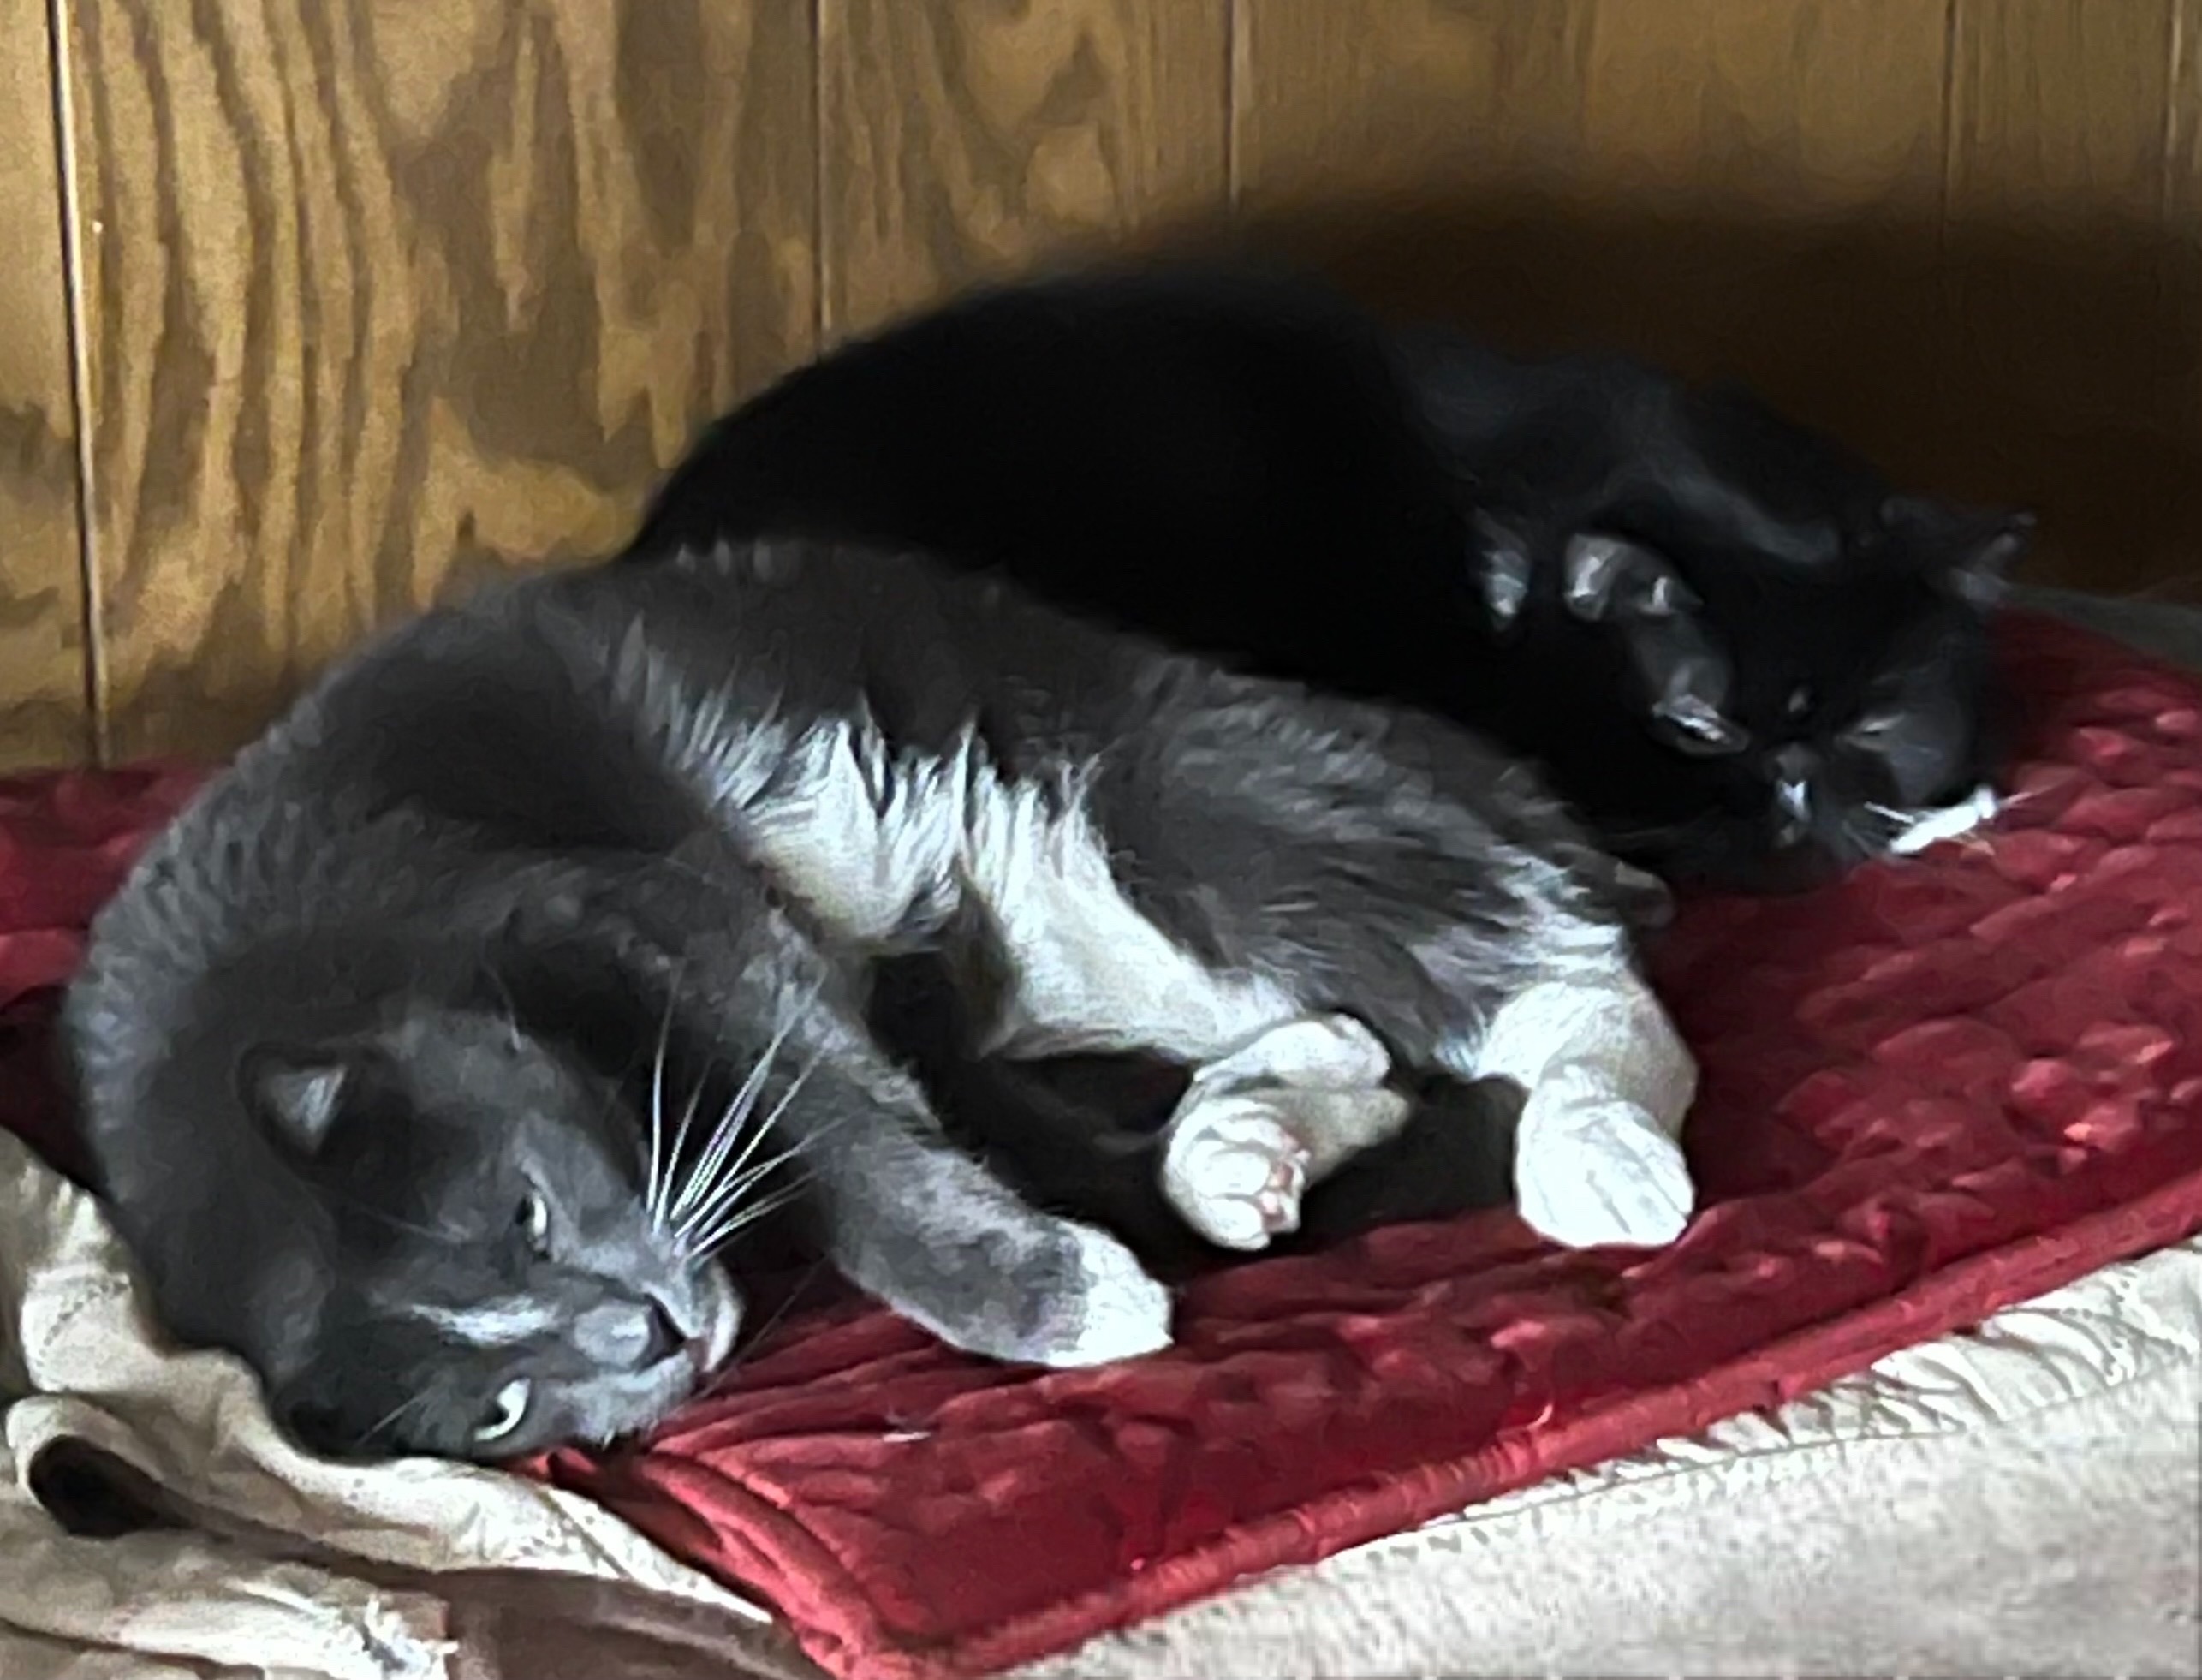 a picture of Pyrus (black) and Taxus (gray) a cat that needs a foster home.